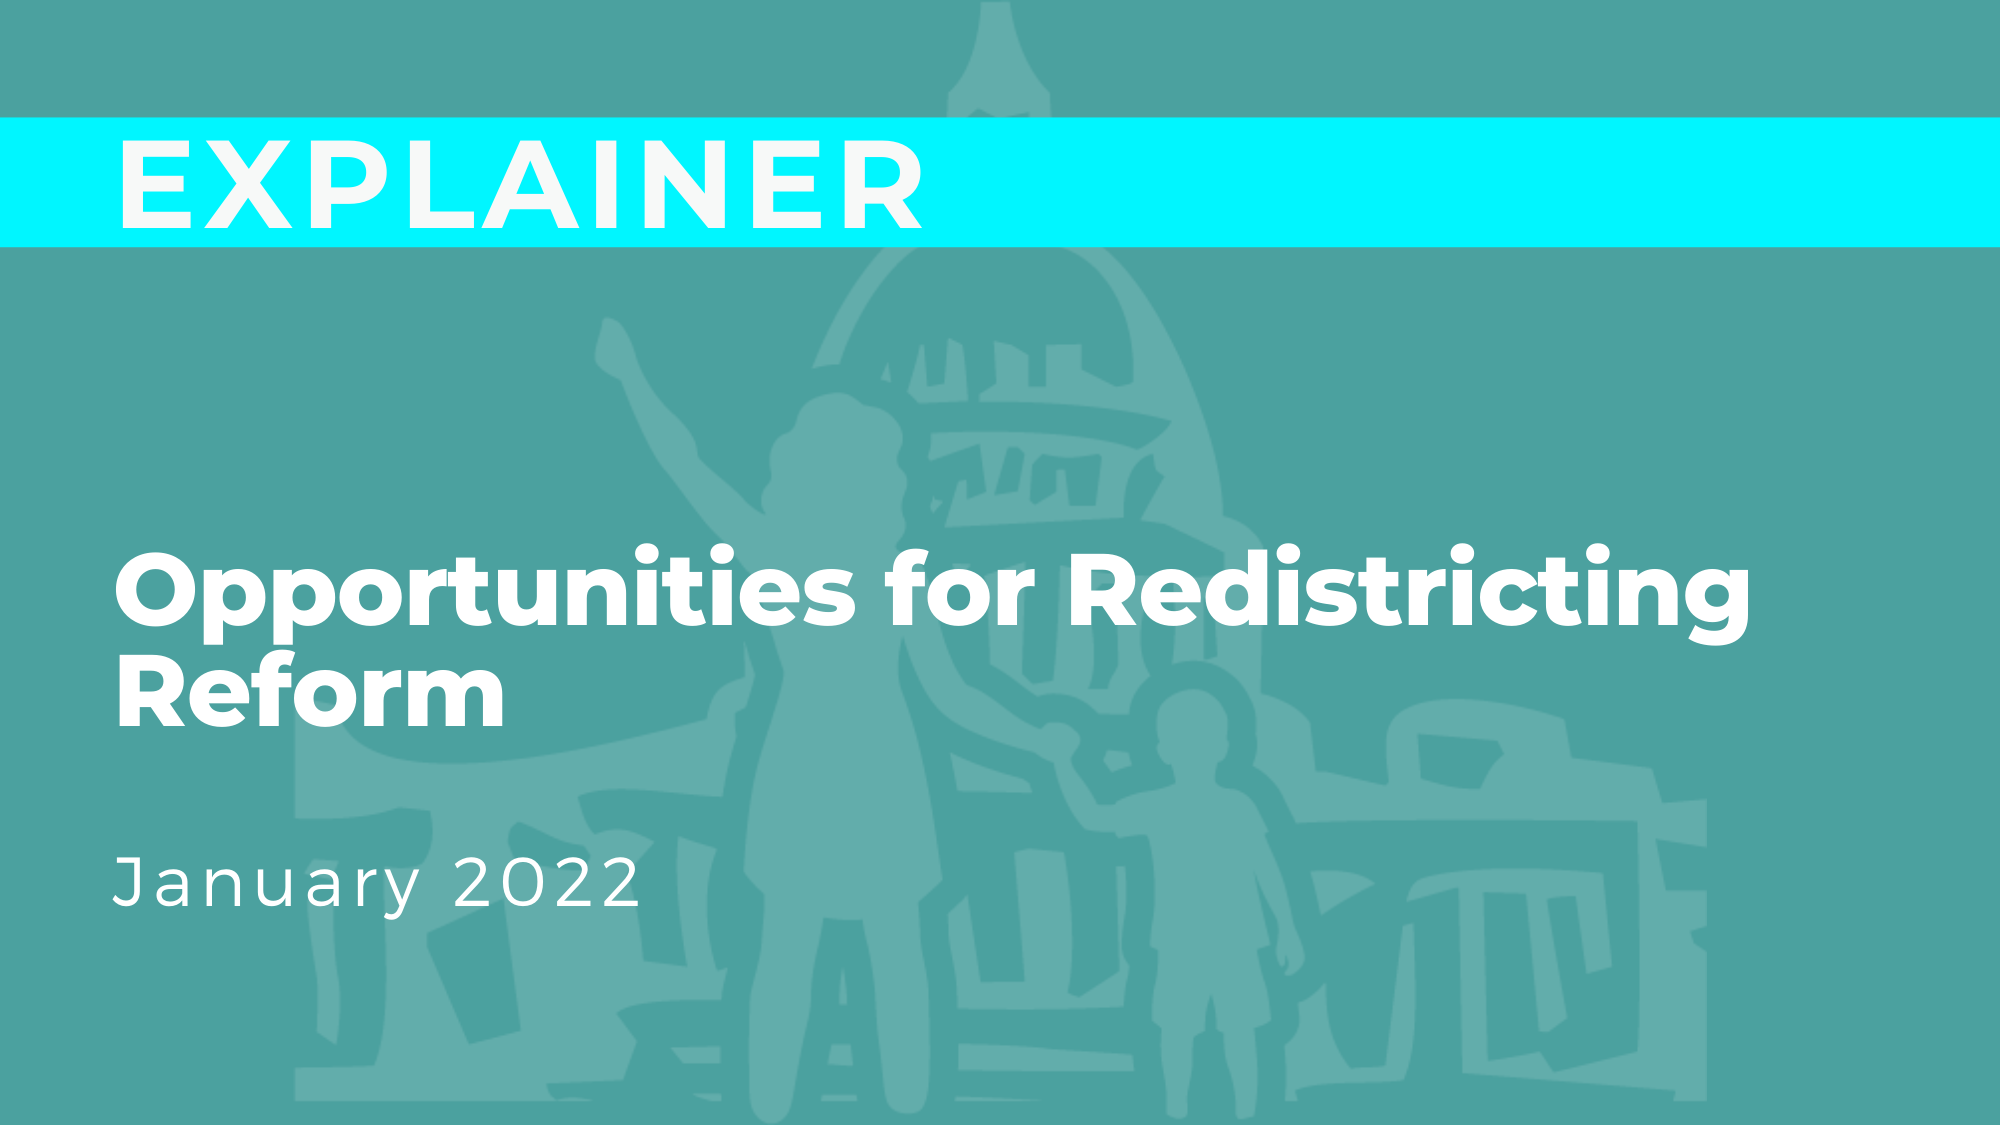 Opportunities for Redistricting Reform